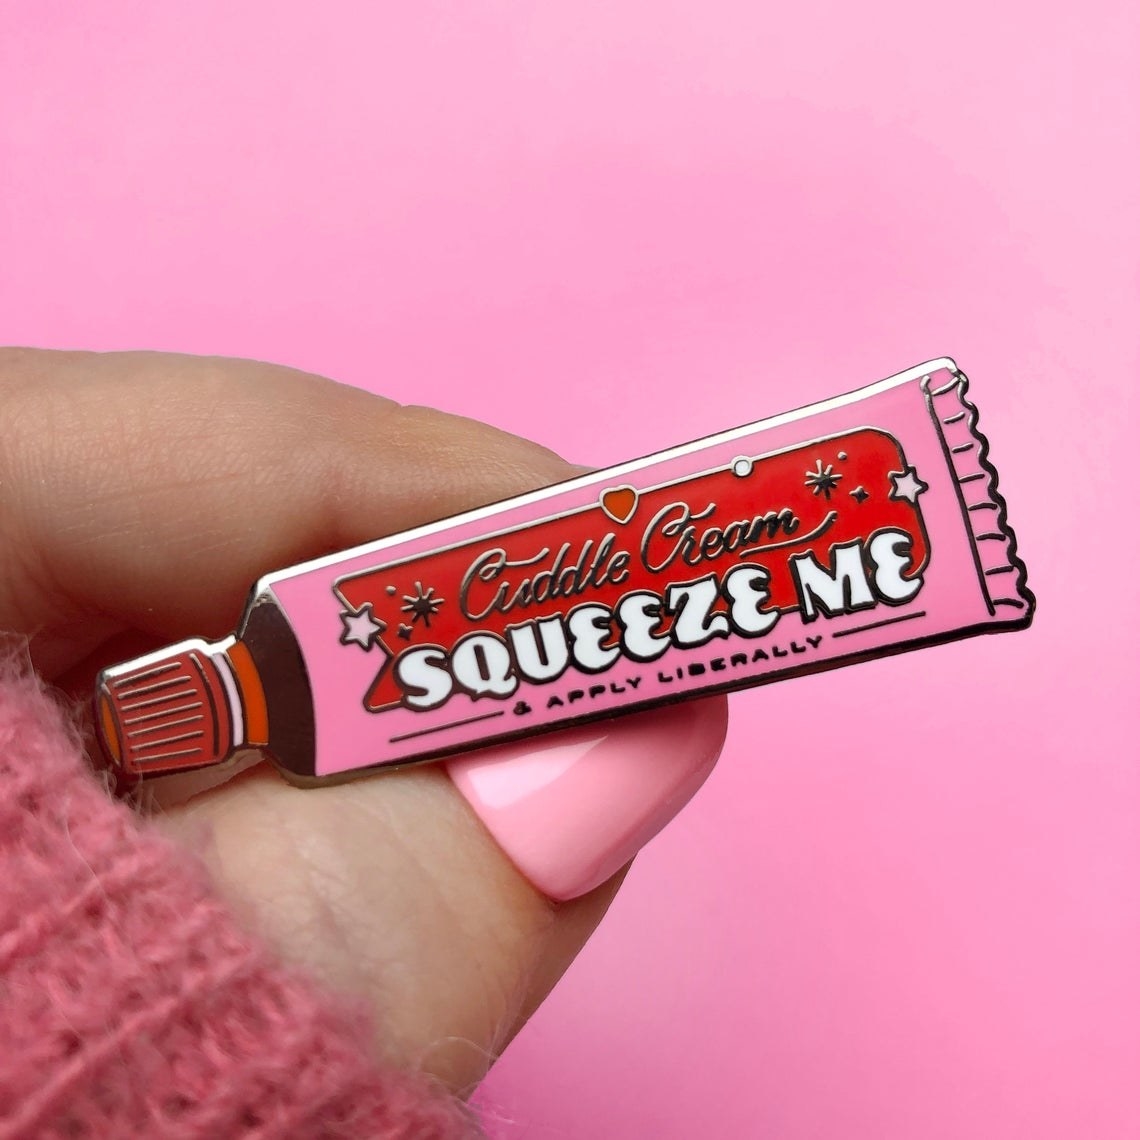 Tube shaped pin with words &quot;Cuddle Cream Squeeze Me &amp;amp; Apply Liberally&quot; 